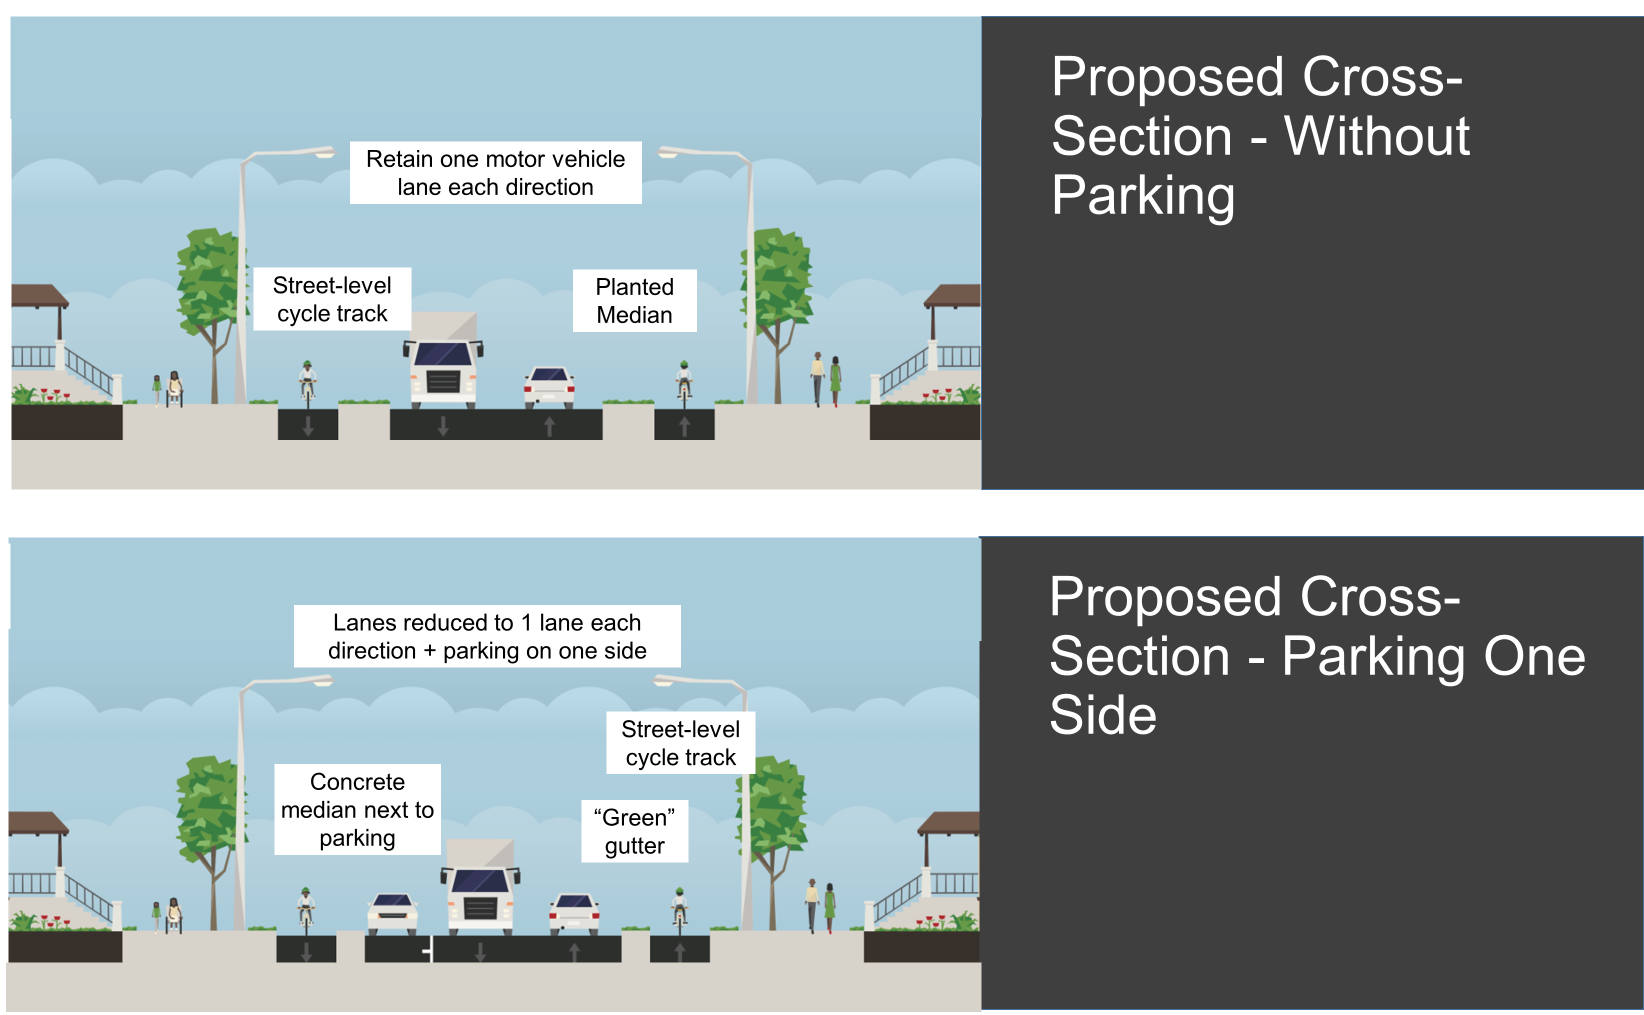 The photo shows the two prospective changes being considered. The first image proposes changes to the roadway without parking and the second proposes changes to include parking